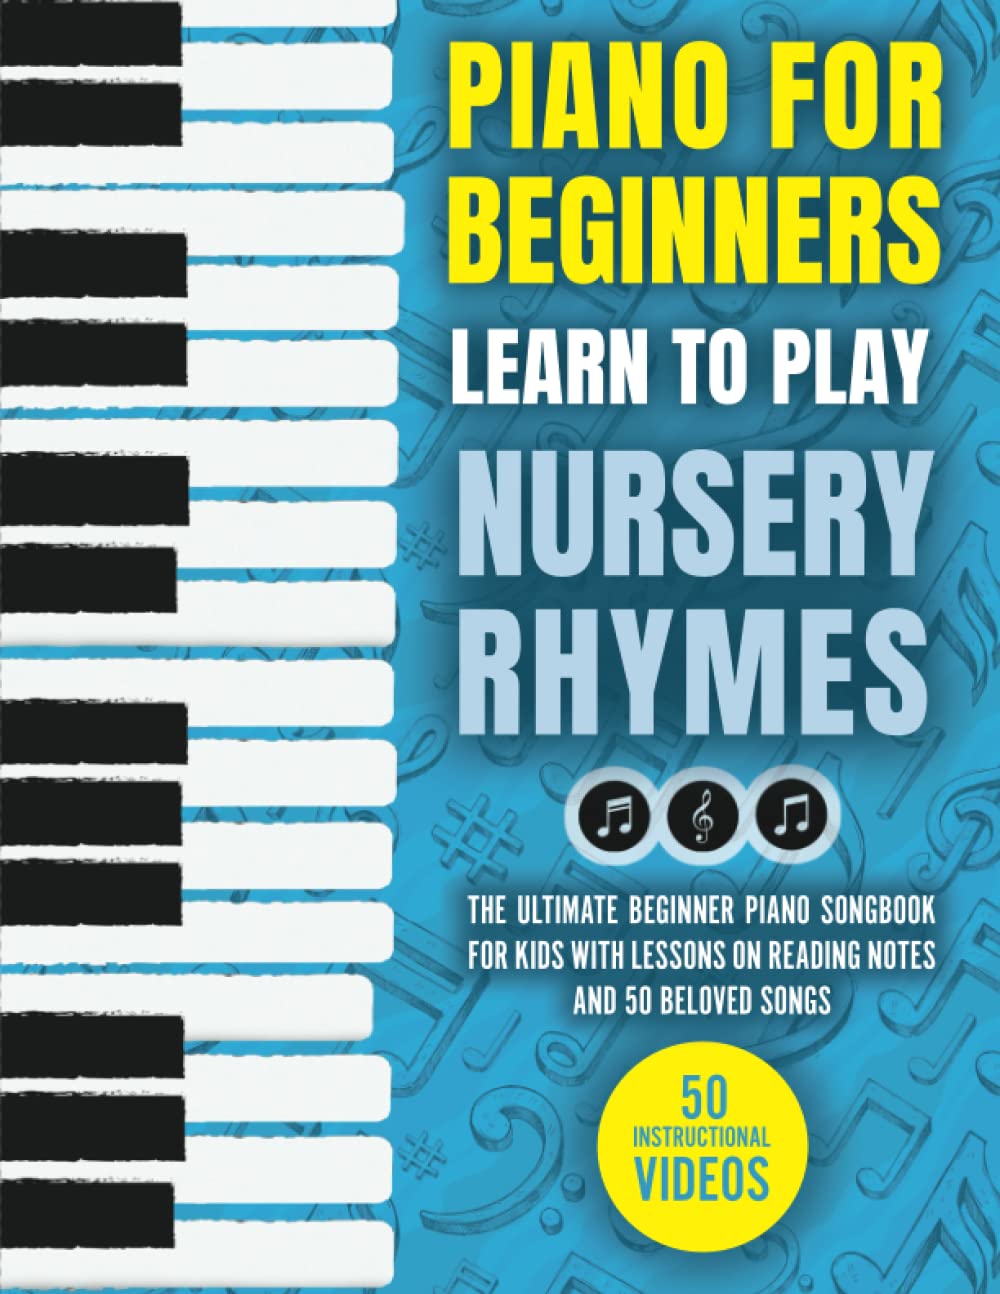 Piano for Beginners - Learn to Play Nursery Rhymes: The Ultimate Beginner Piano Songbook for Kids with Lessons on Reading Notes and 50 Beloved Songs (My First Piano Sheet Music Books)